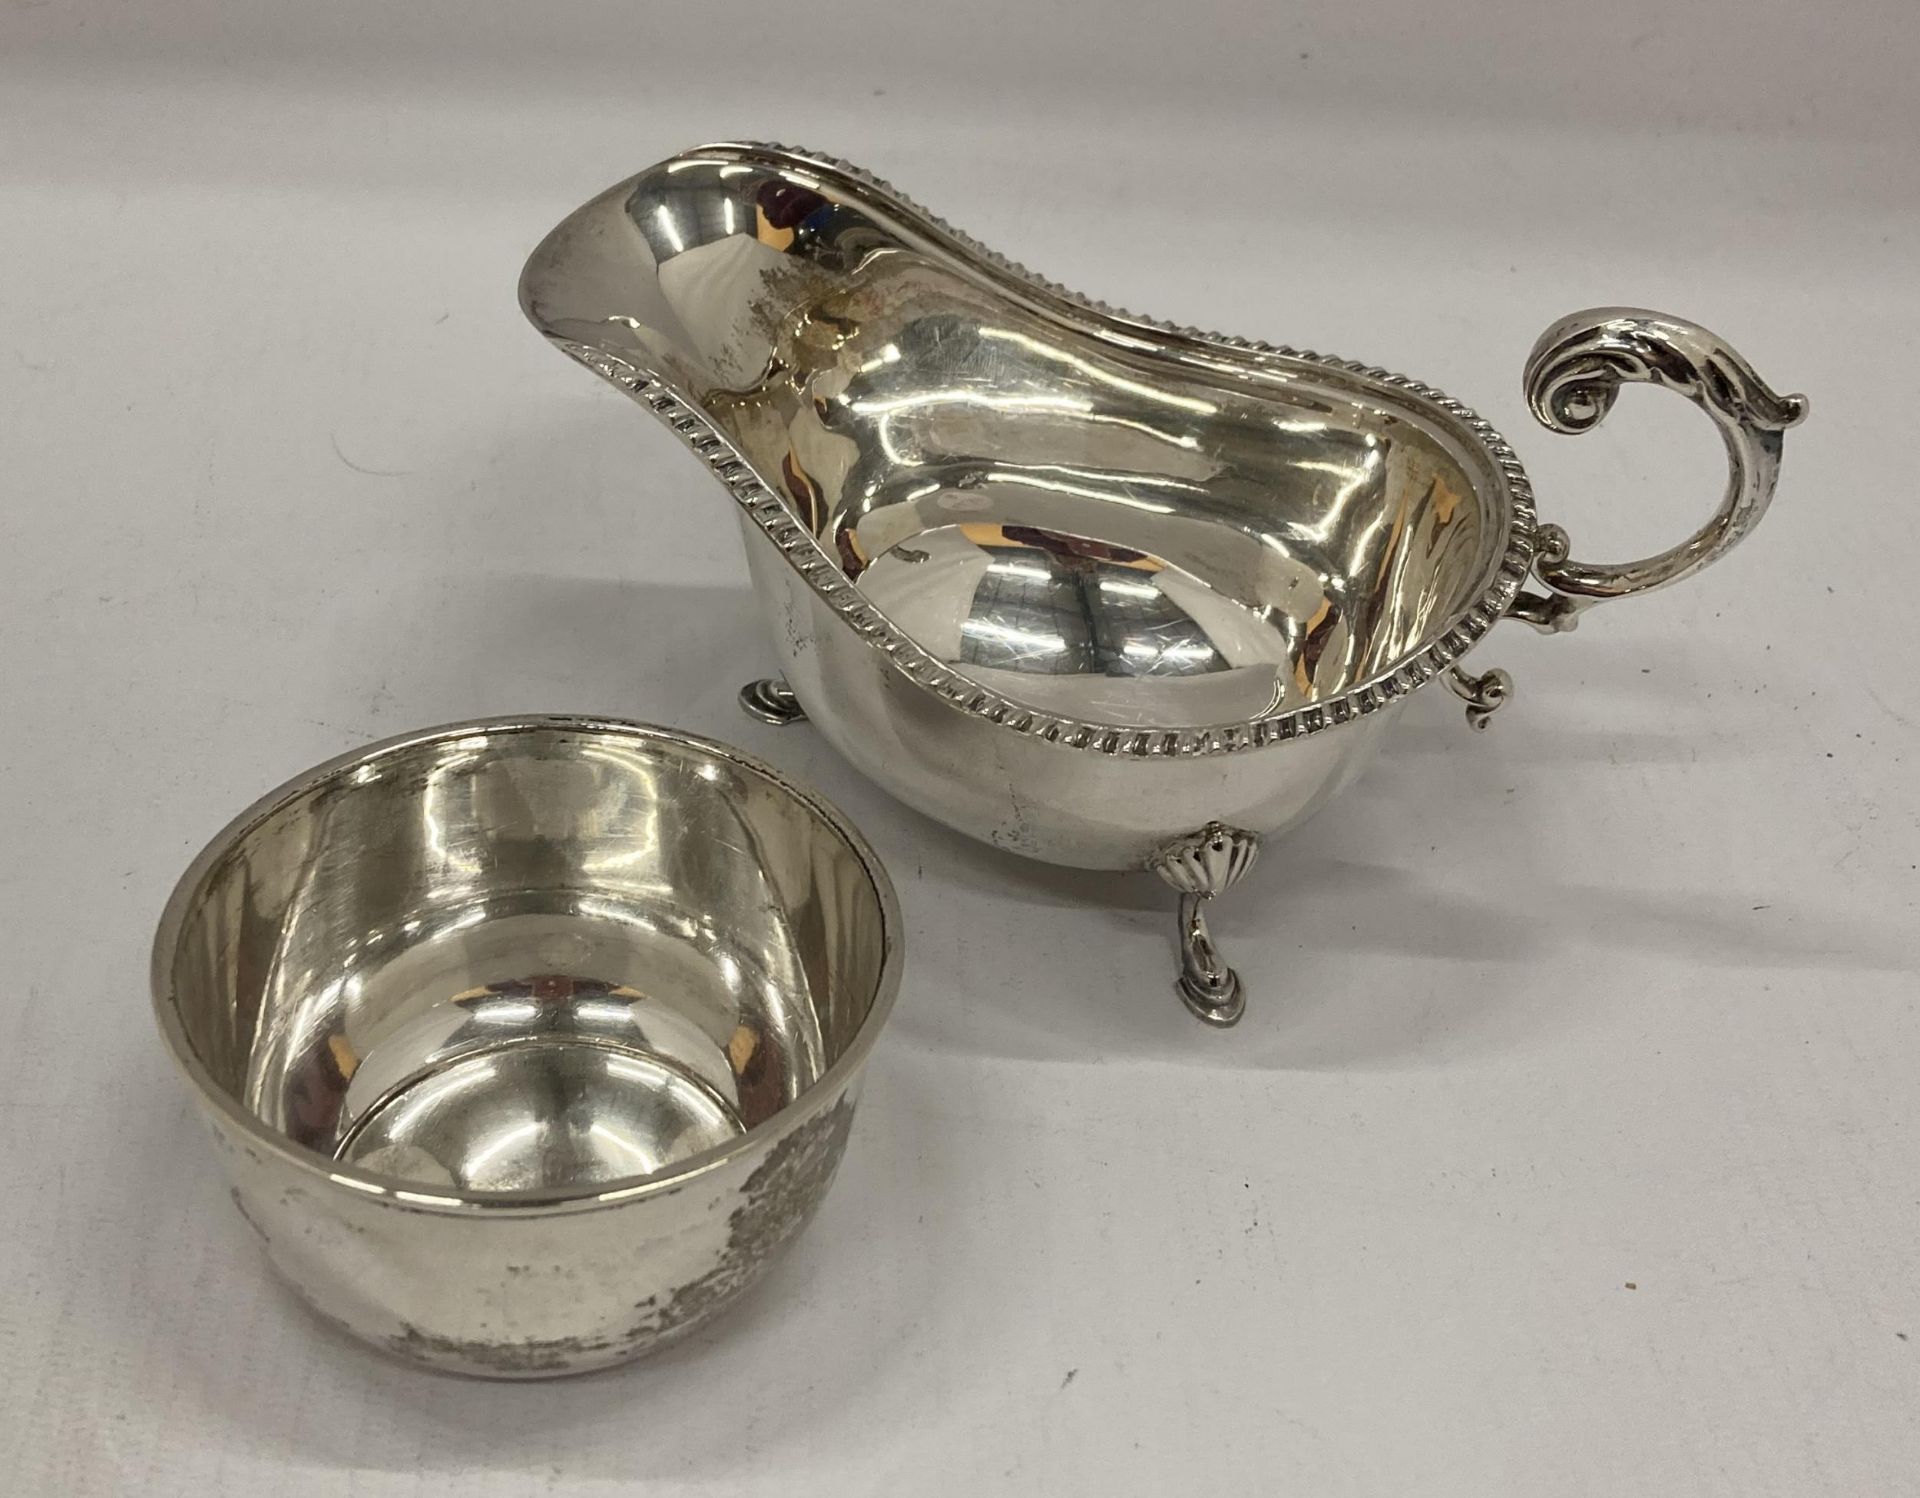 TWO BIRKS STERLING SILVER HALLMARKED ITEMS - CUP AND GRAVY / SAUCE BOAT, TOTAL WEIGHT 78G